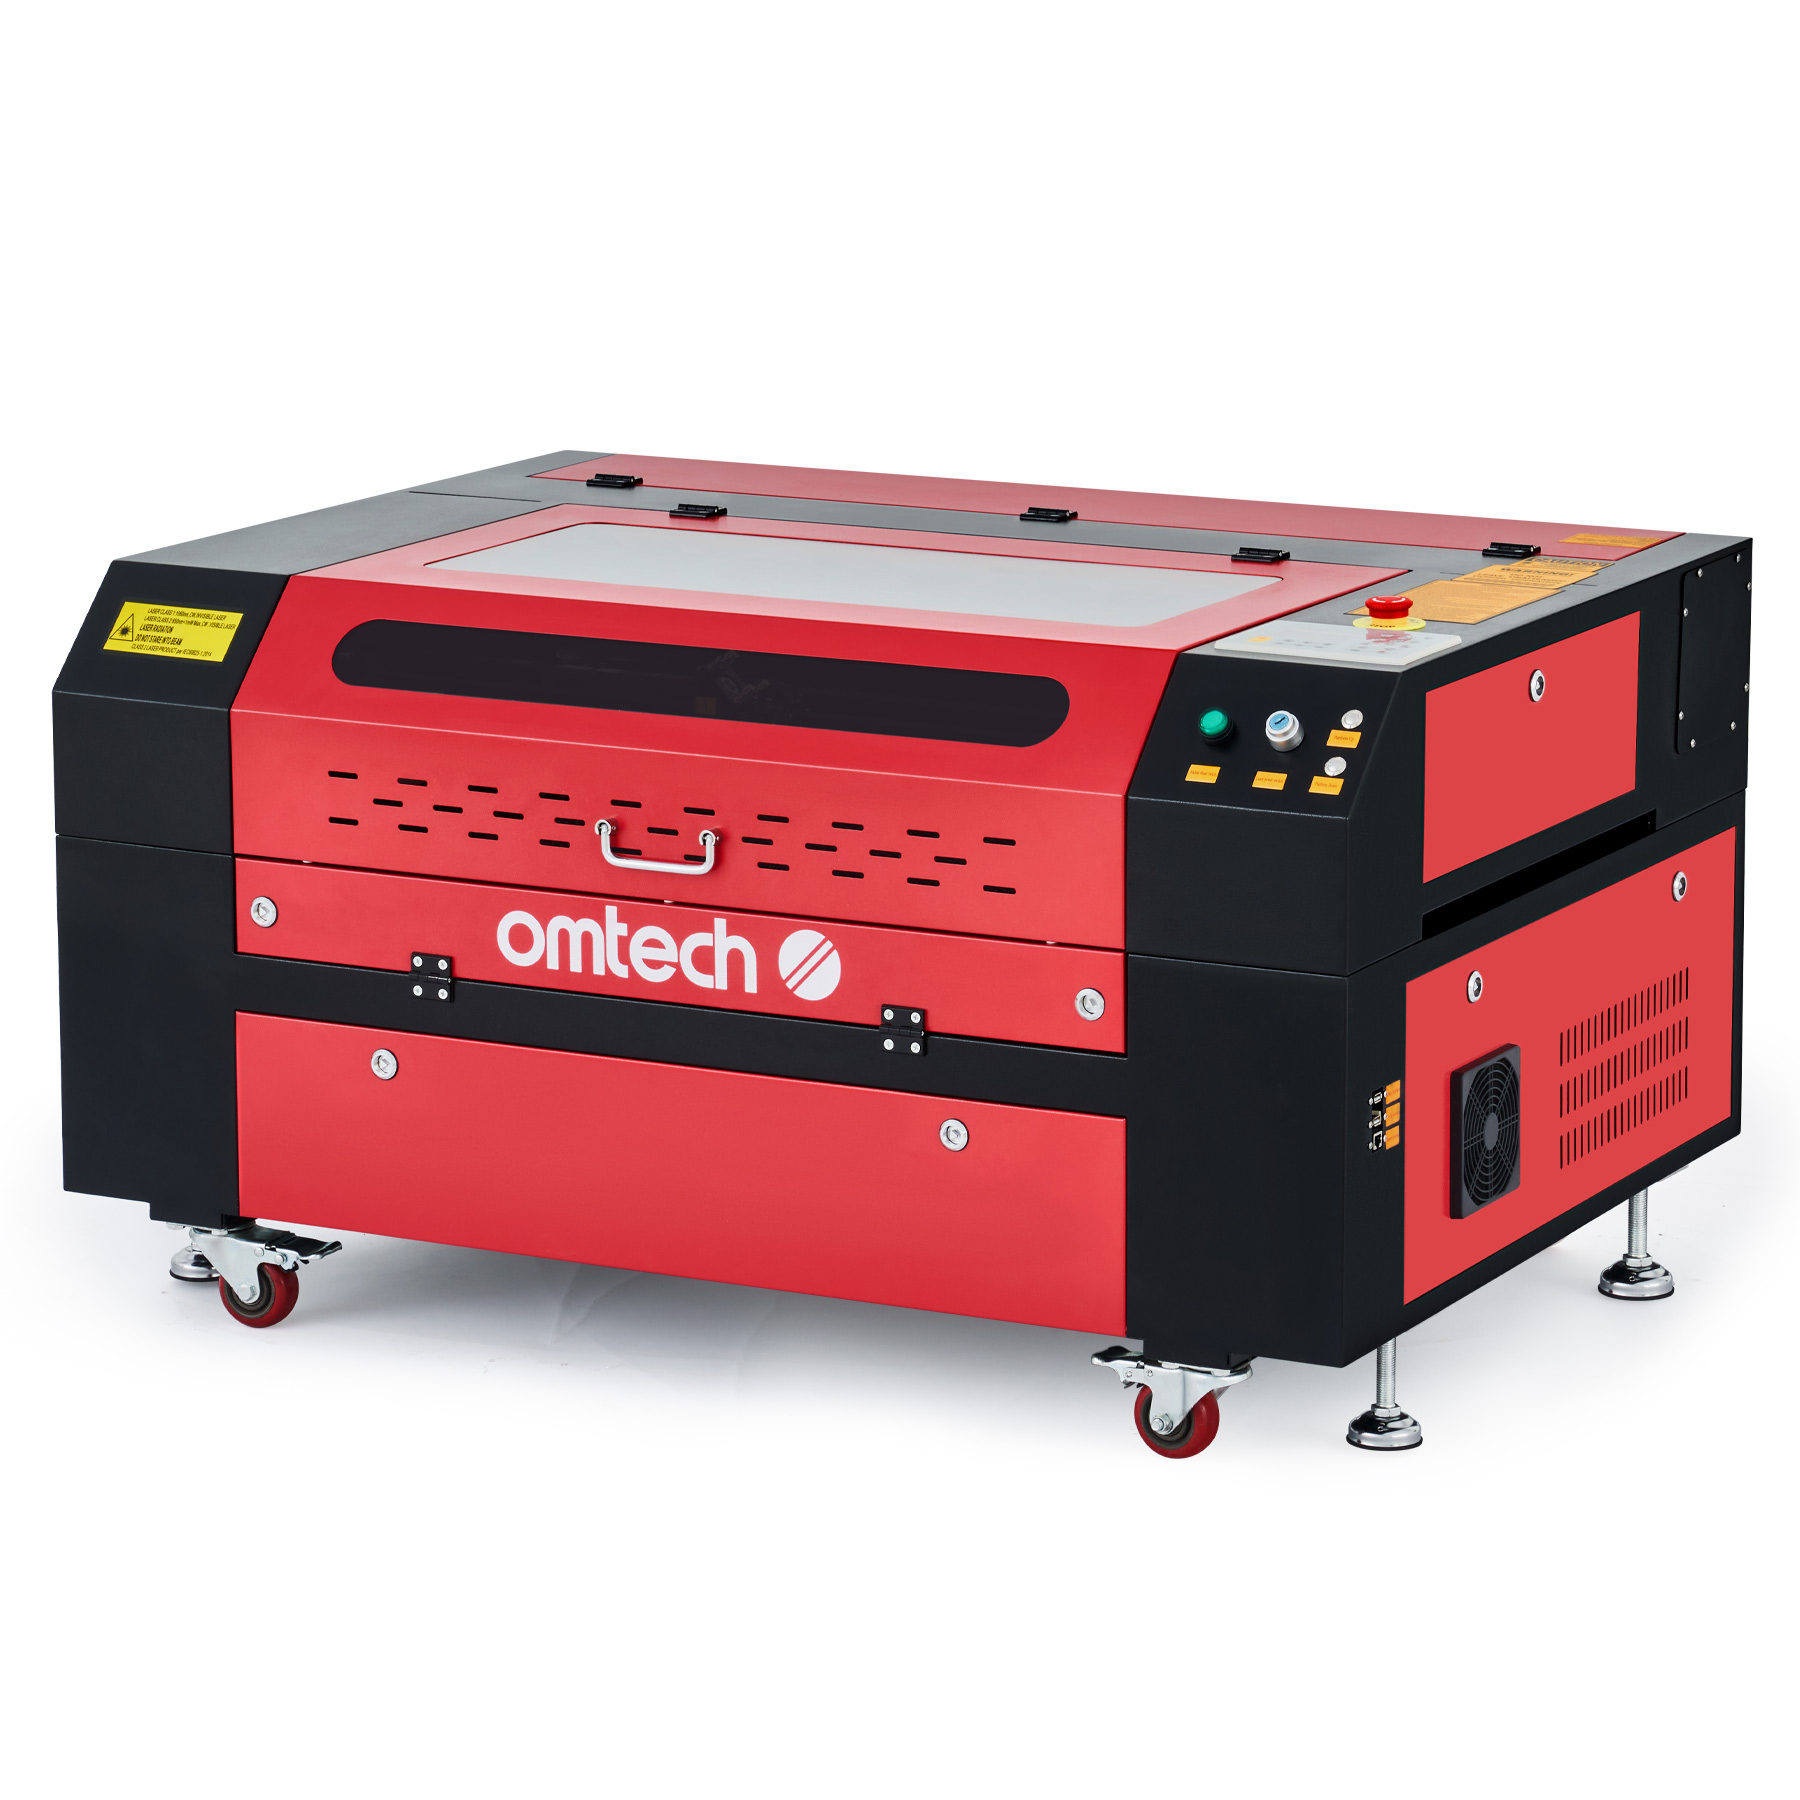 50W CO2 Laser Engraver - Pay as Low as $67/mo. - OMTech – OMTech Laser